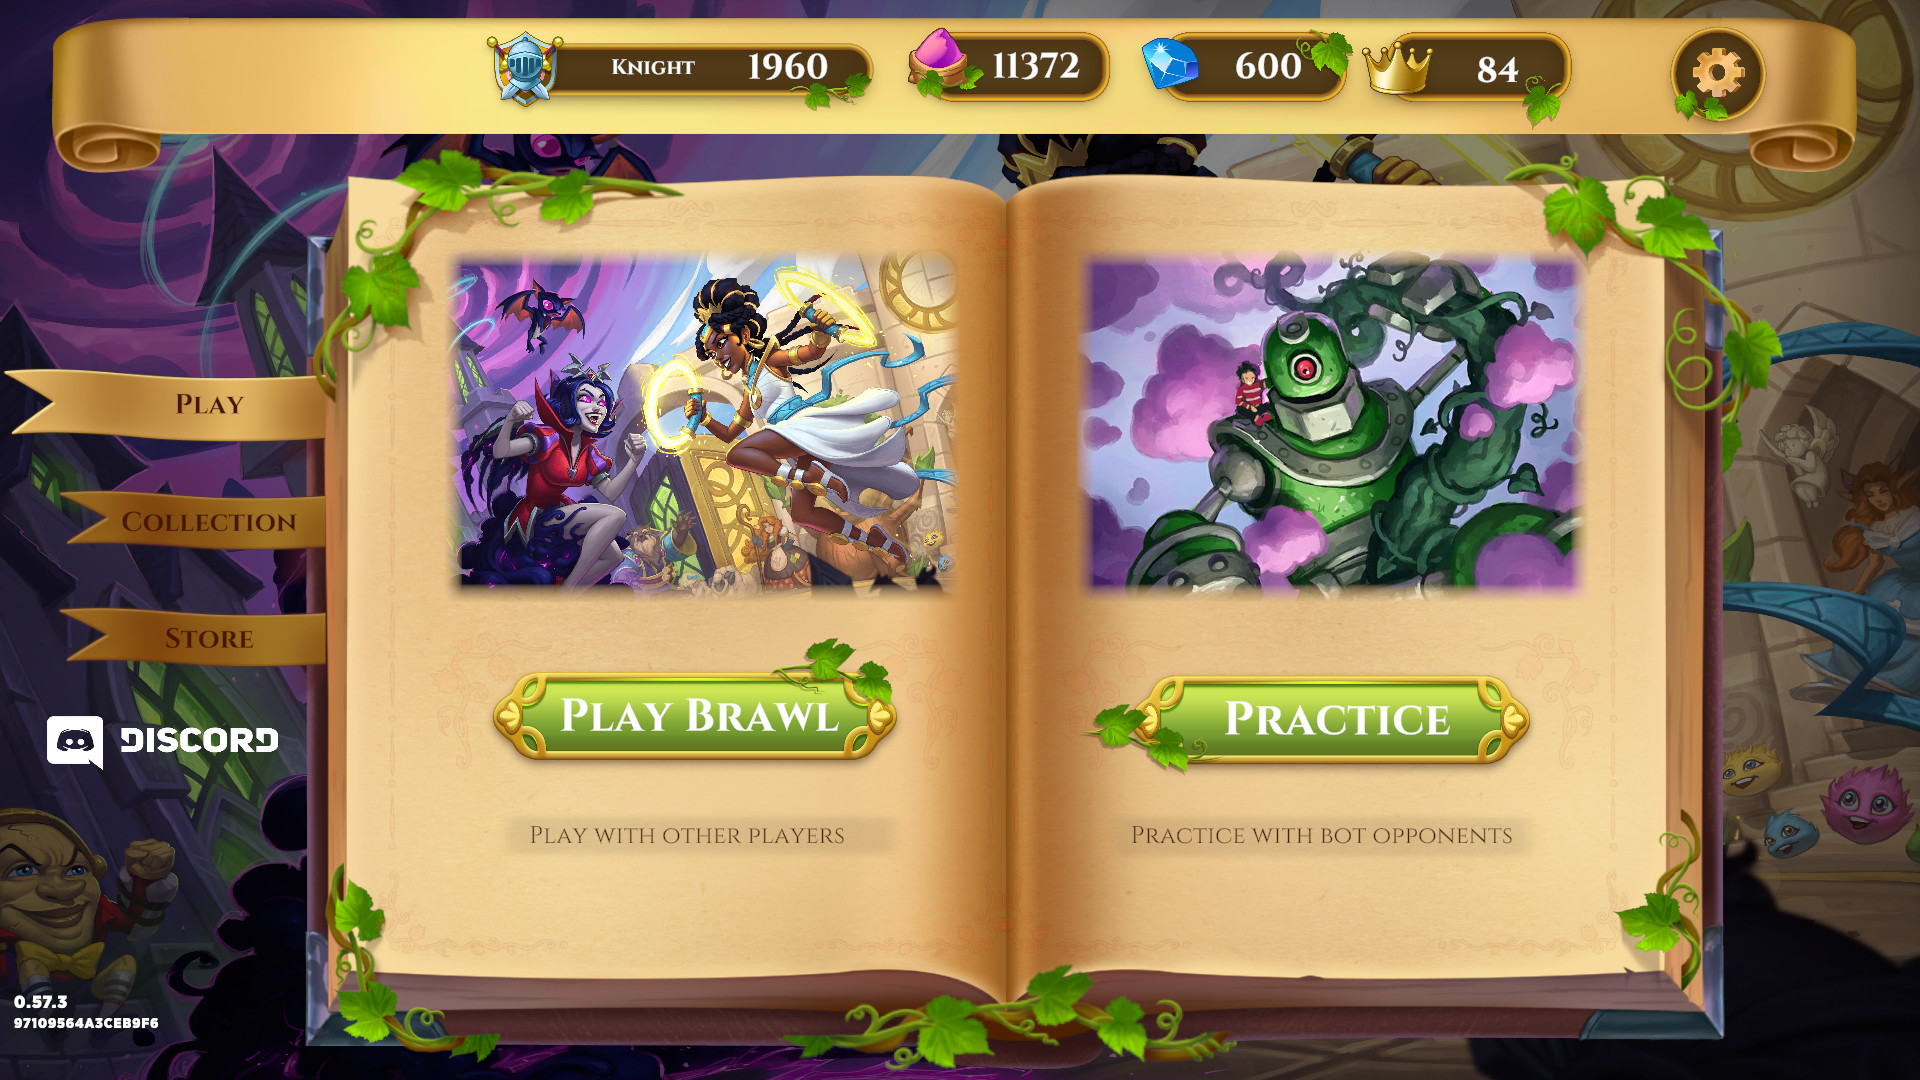 Cryptocurrency exchange company FTX has acquired Good Luck Games, creators of Storybook Brawl